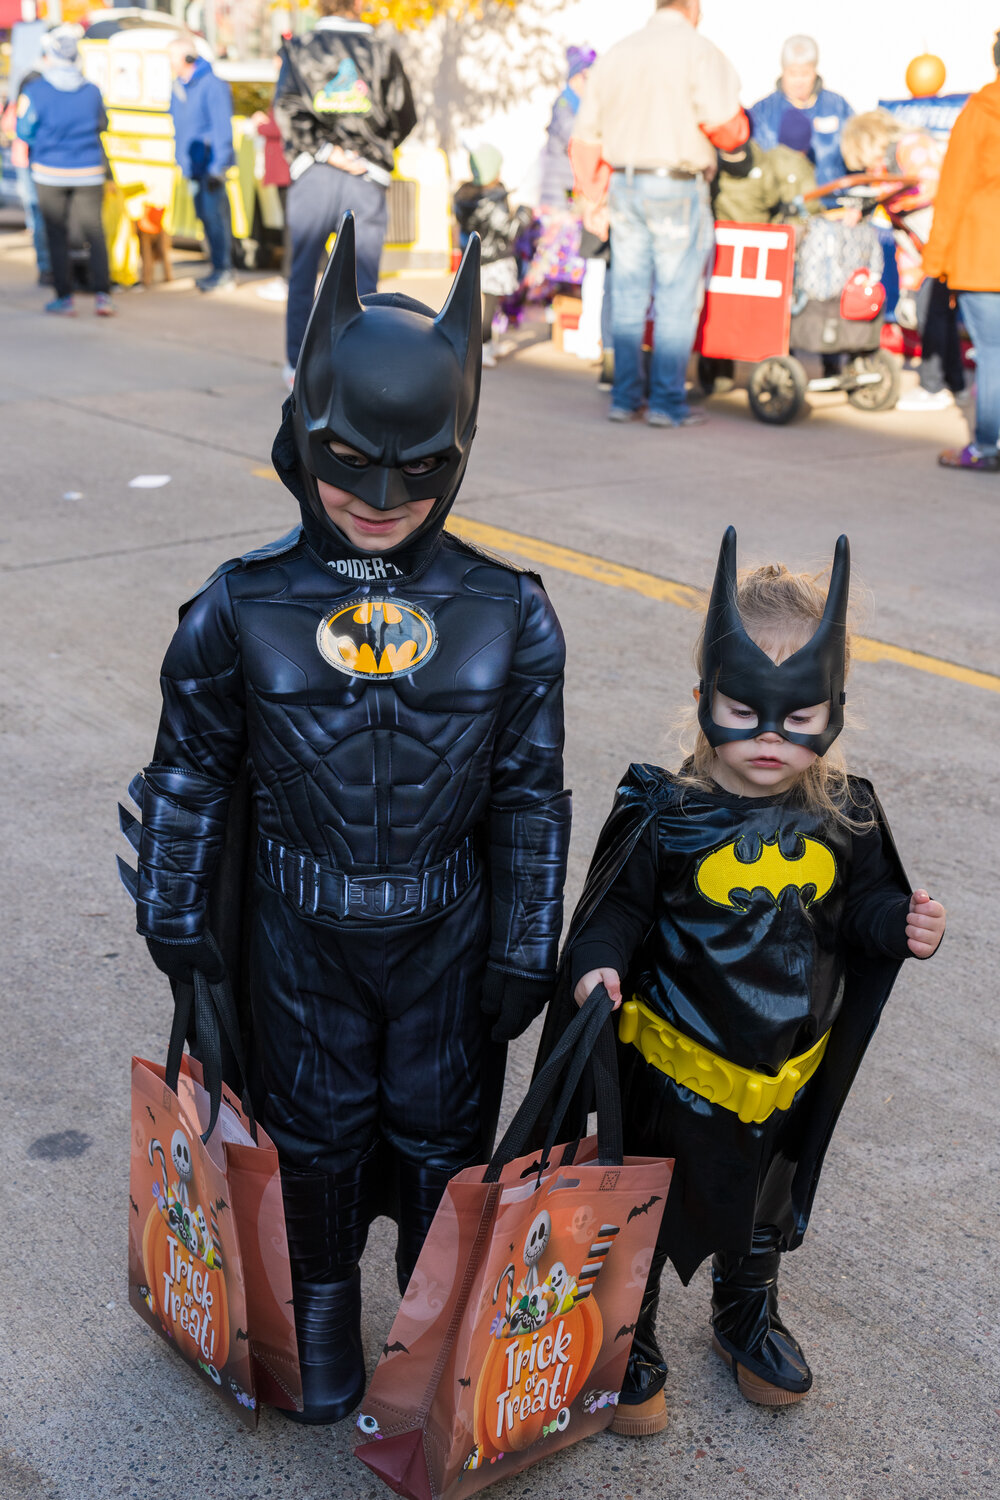 Batman and Batgirl were on the job, ready to fight crime on Hastings streets. Thankfully, they only needed to gather candy.